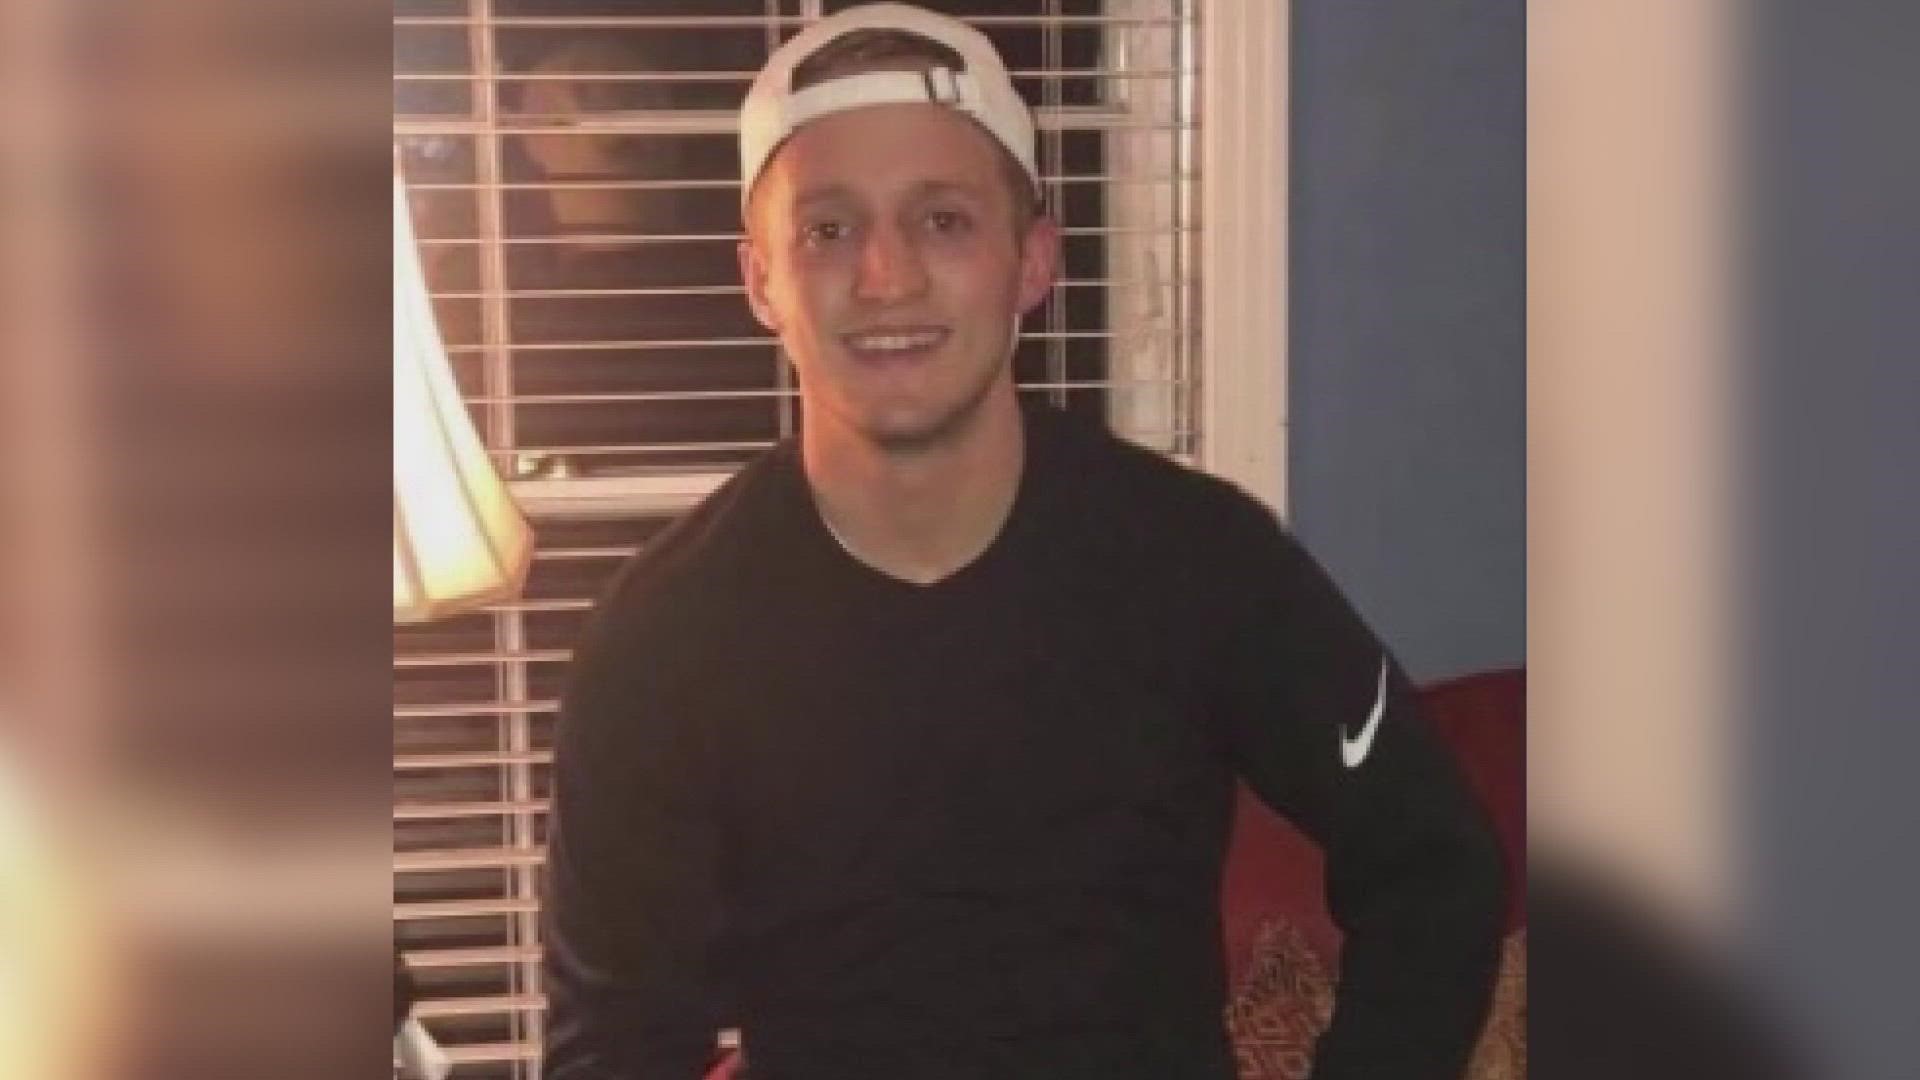 Tyler Elliott, 29, is being remembered by the Louisville community after he died while boating on the Lake of the Ozarks in Missouri.